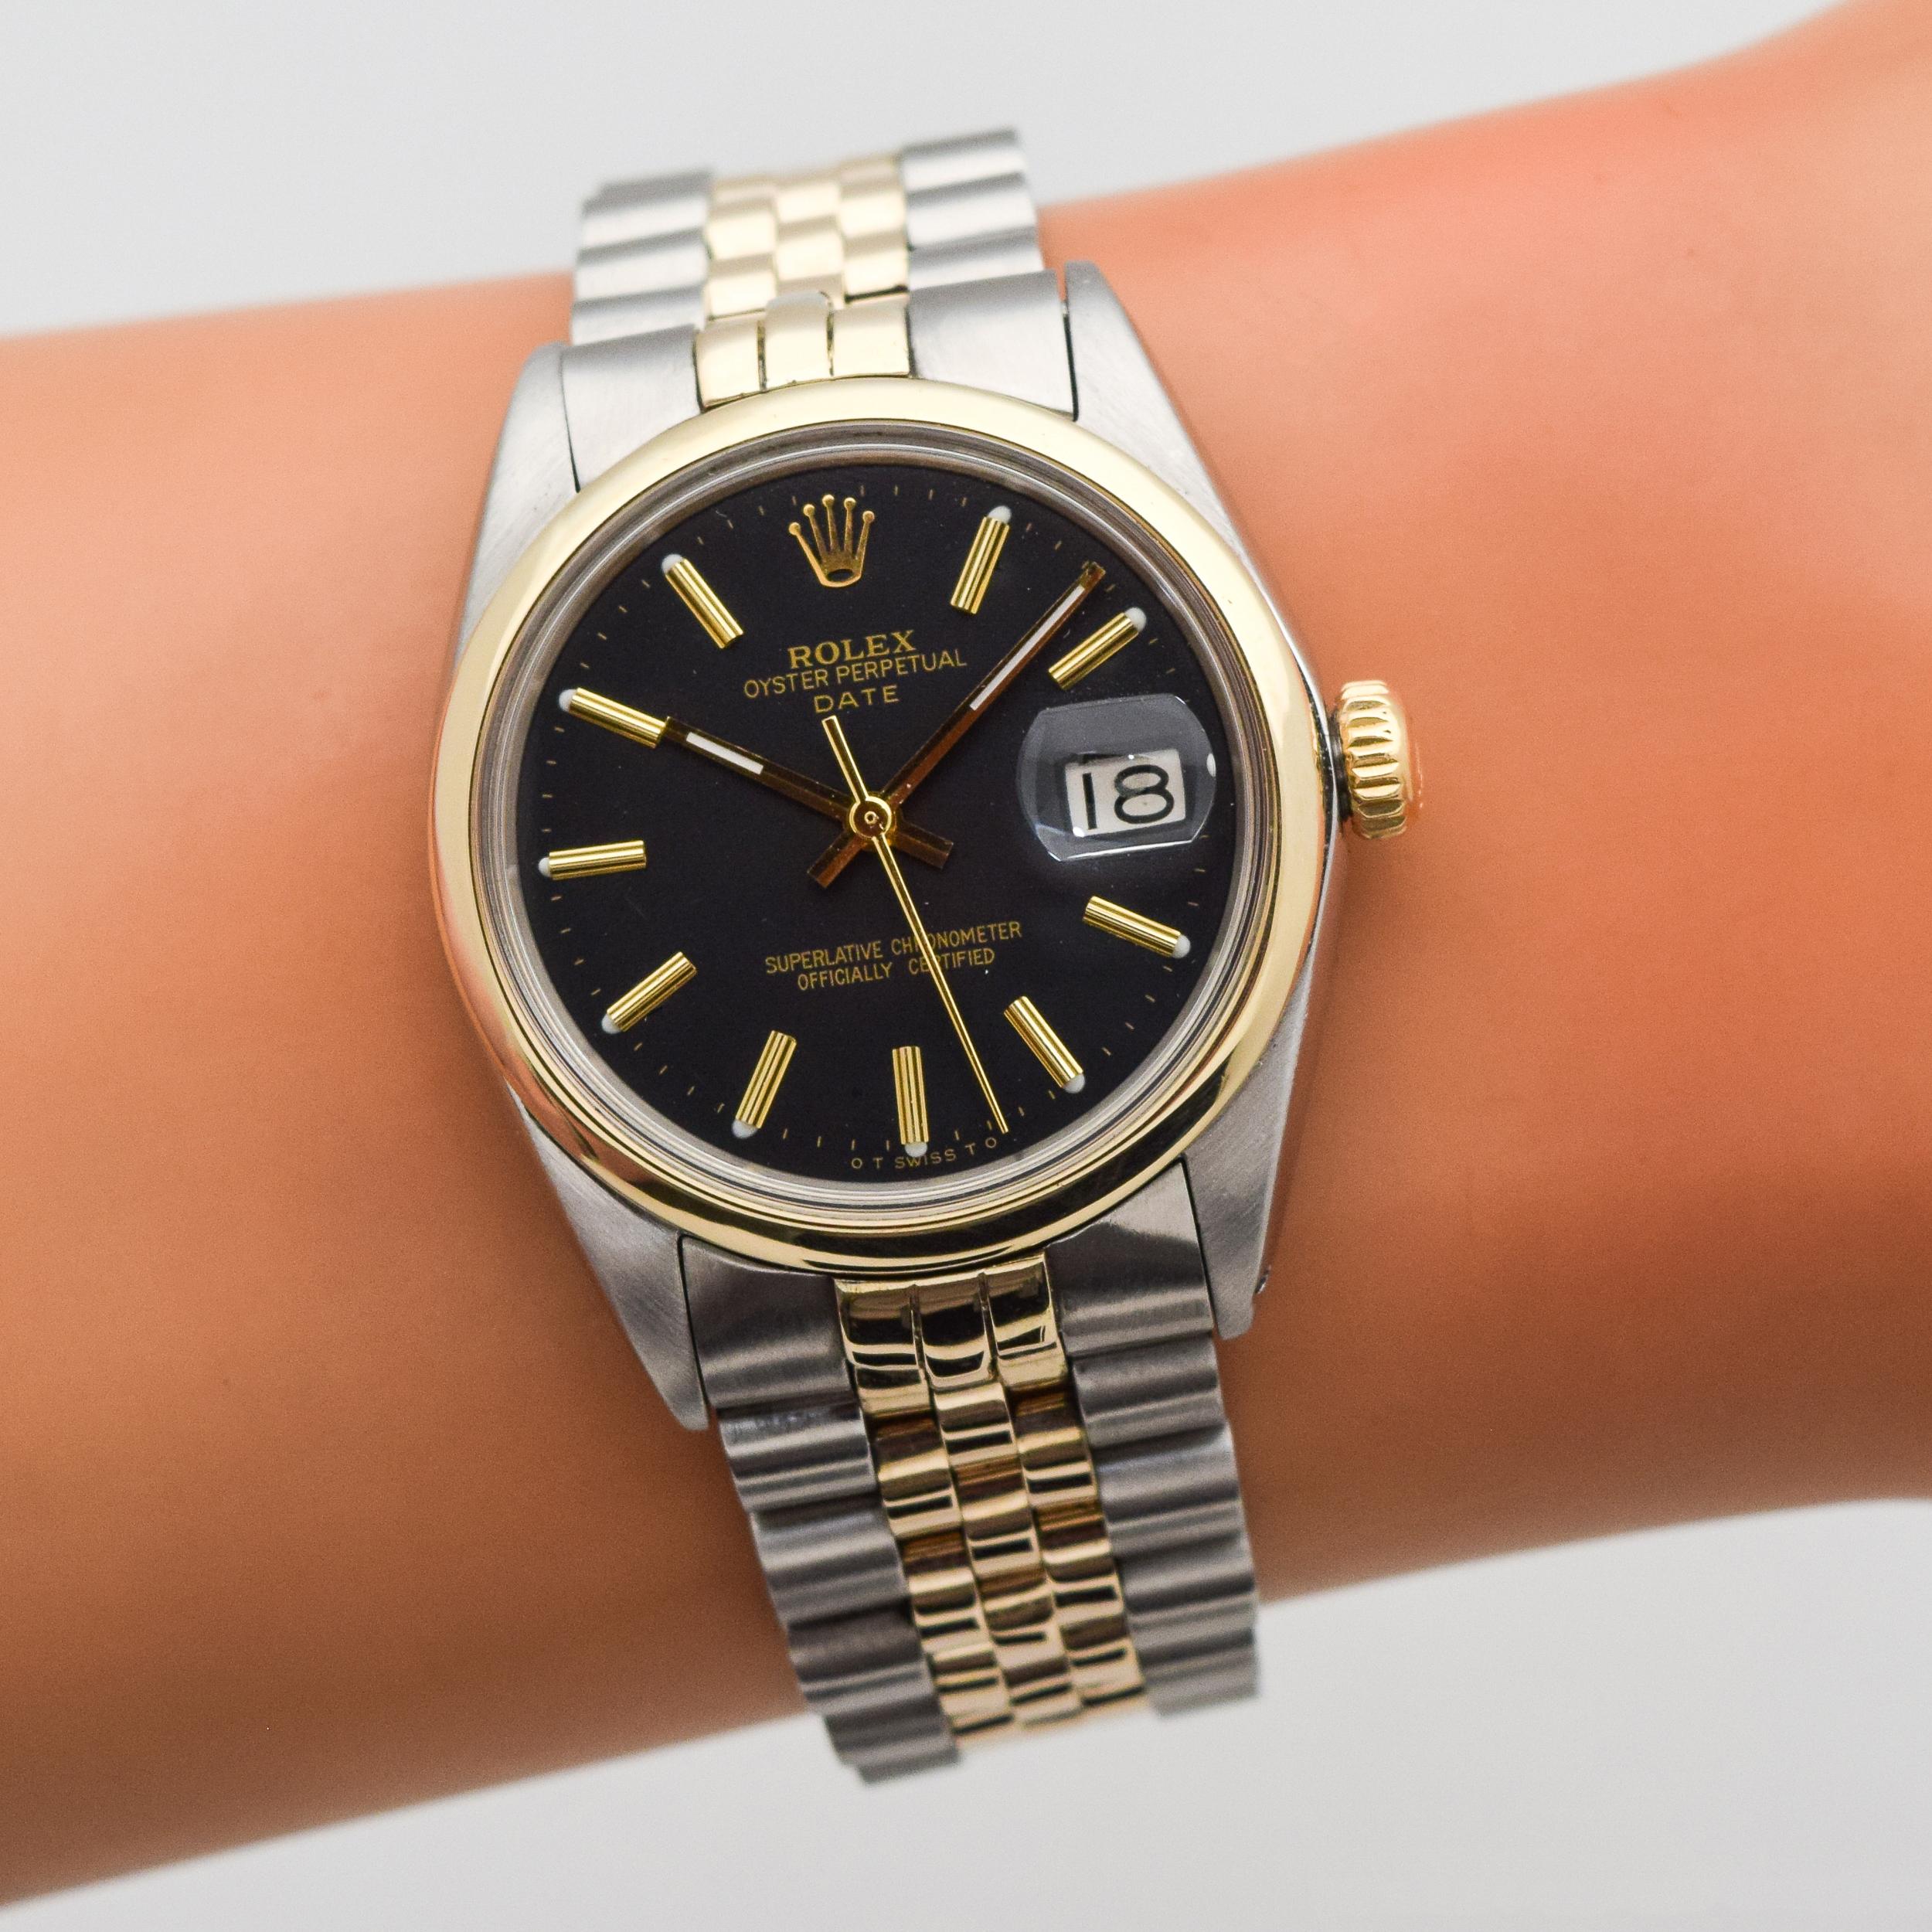 Vintage Rolex Date Automatic Reference 1500 Two-Tone Watch, 1969 For Sale 2